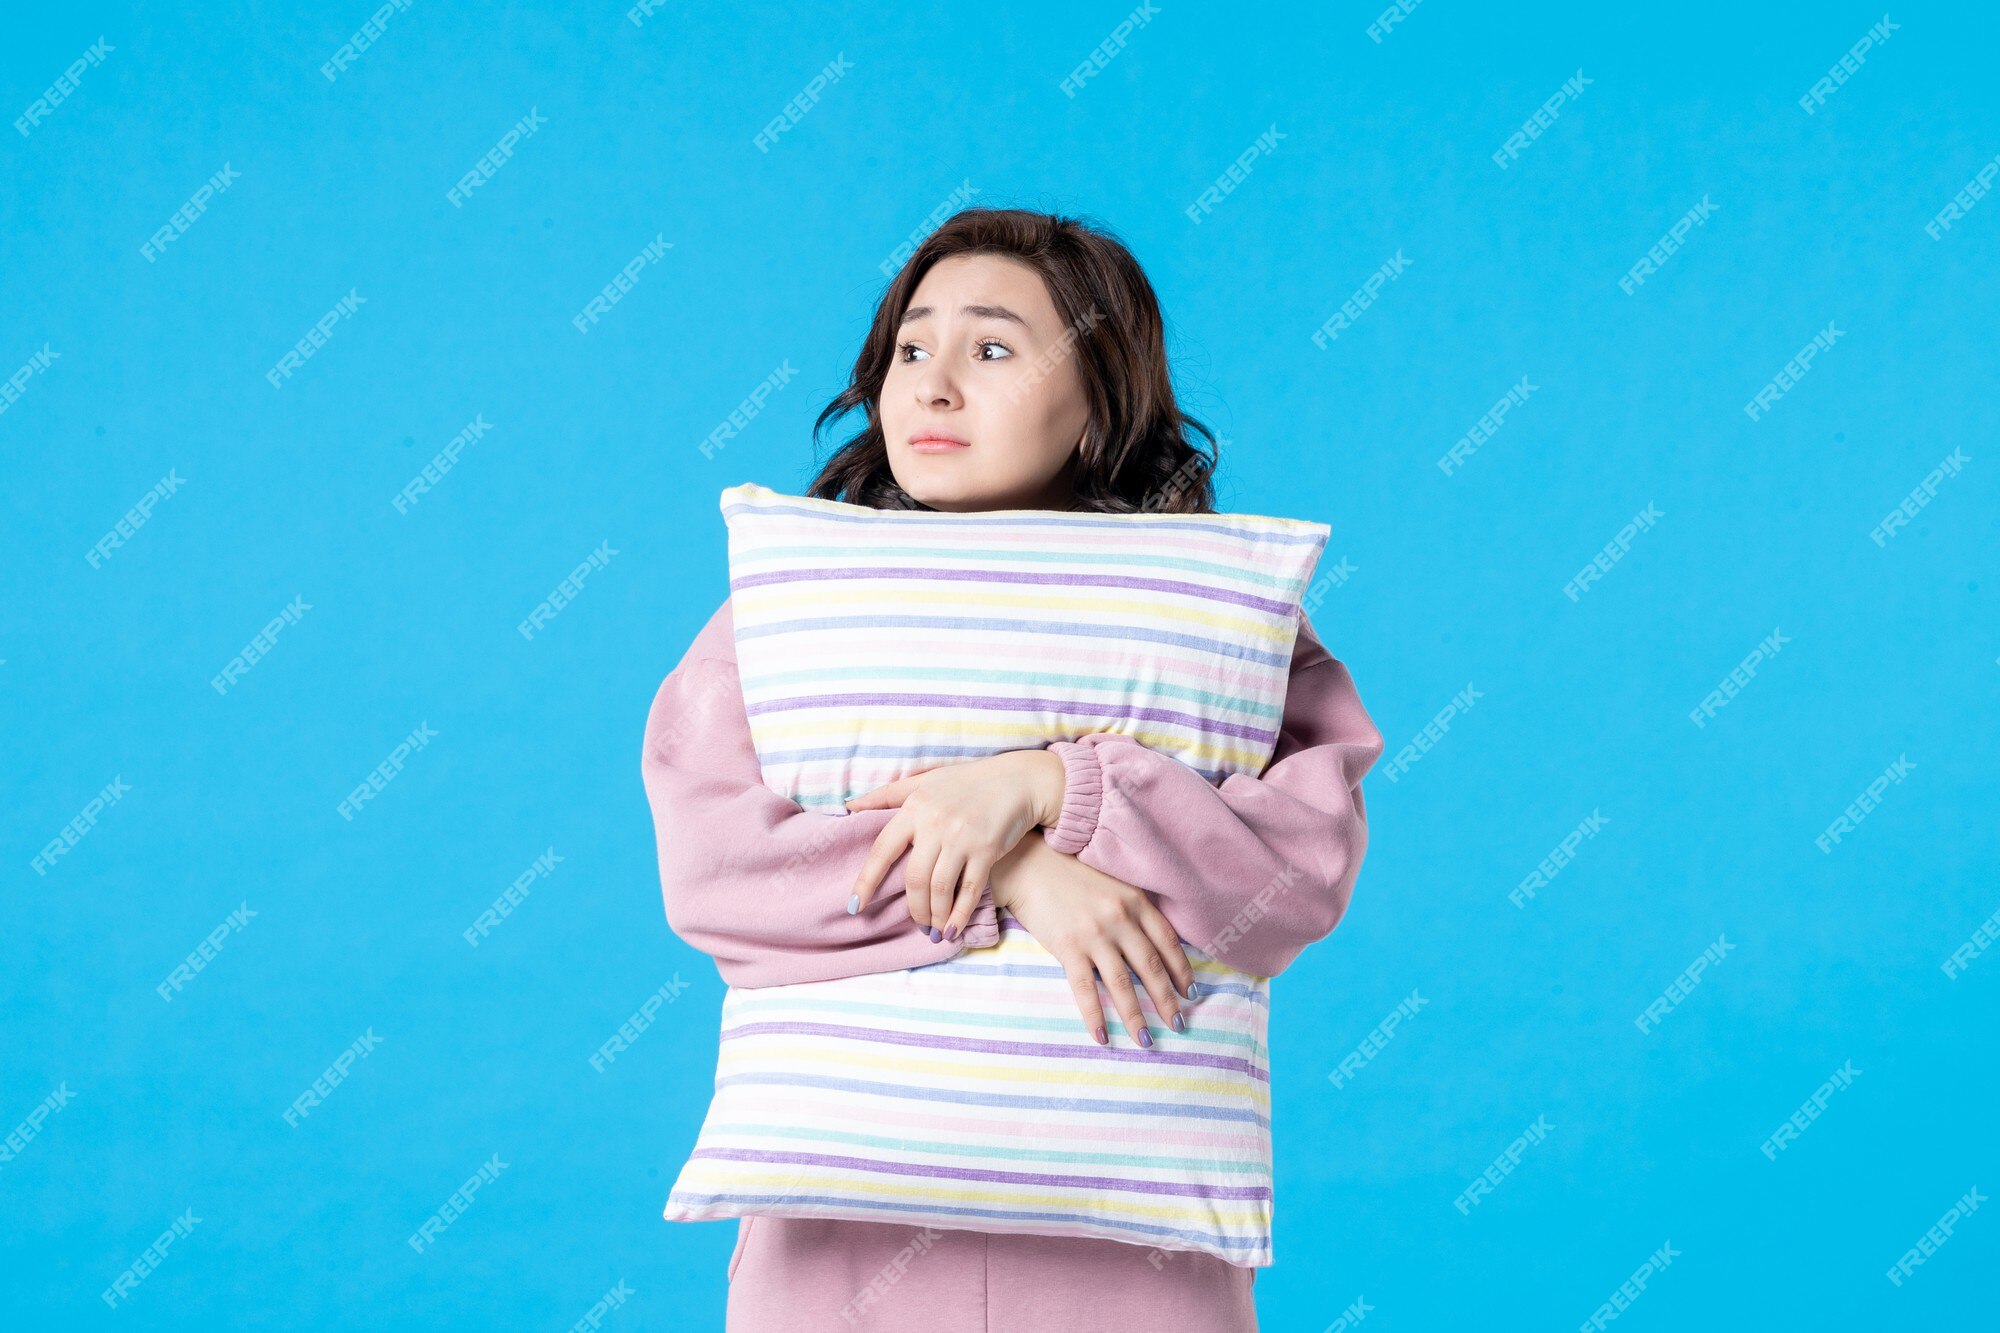 https://img.freepik.com/free-photo/front-view-young-female-pink-pajamas-holding-pillow-blue-wall-night-color-bed-rest-sleep-emotion-model-woman_140725-150265.jpg?w=2000